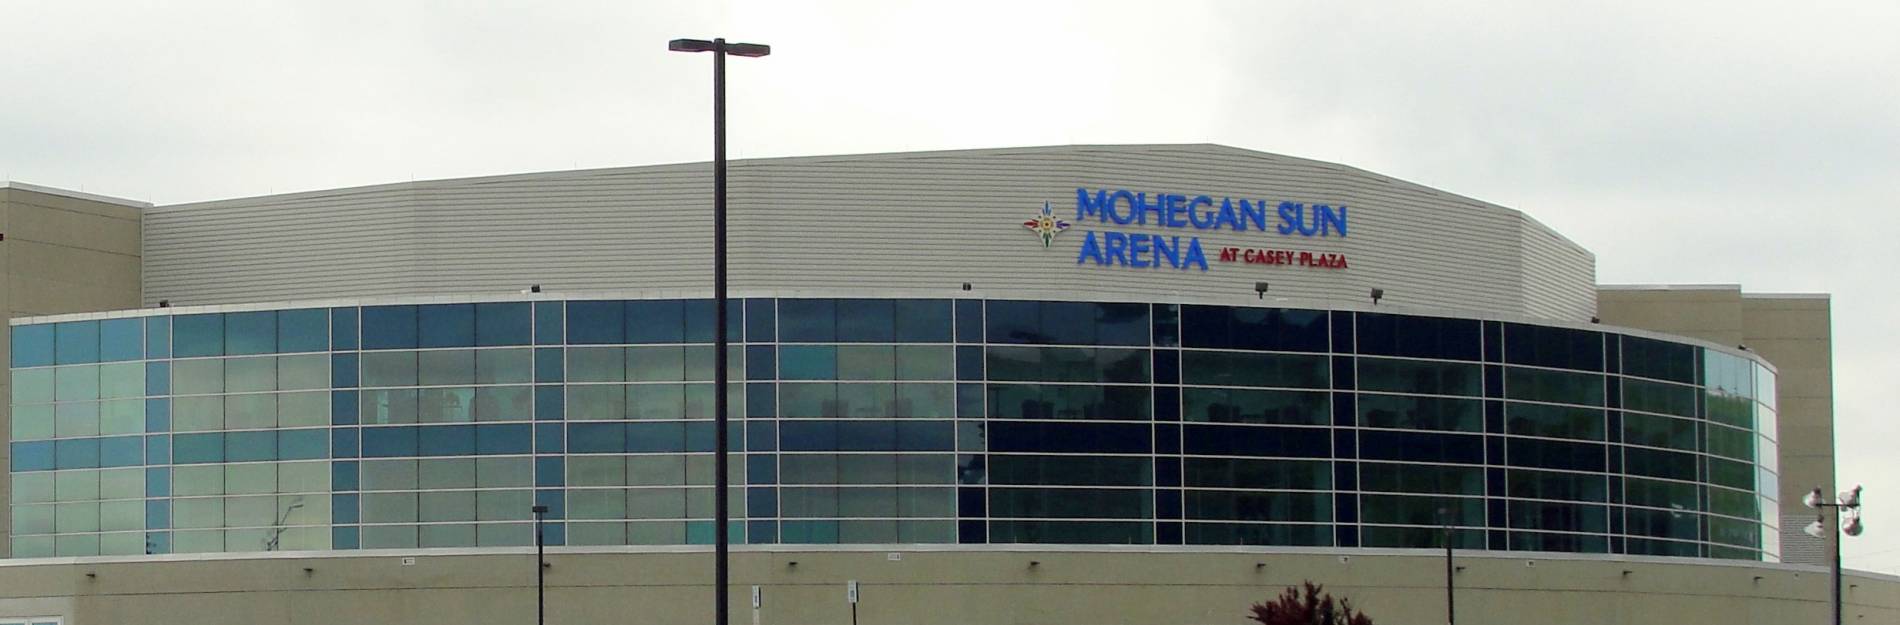 Mohegan Sun Arena at Casey Plaza Events & Tickets 202425 Wilkes